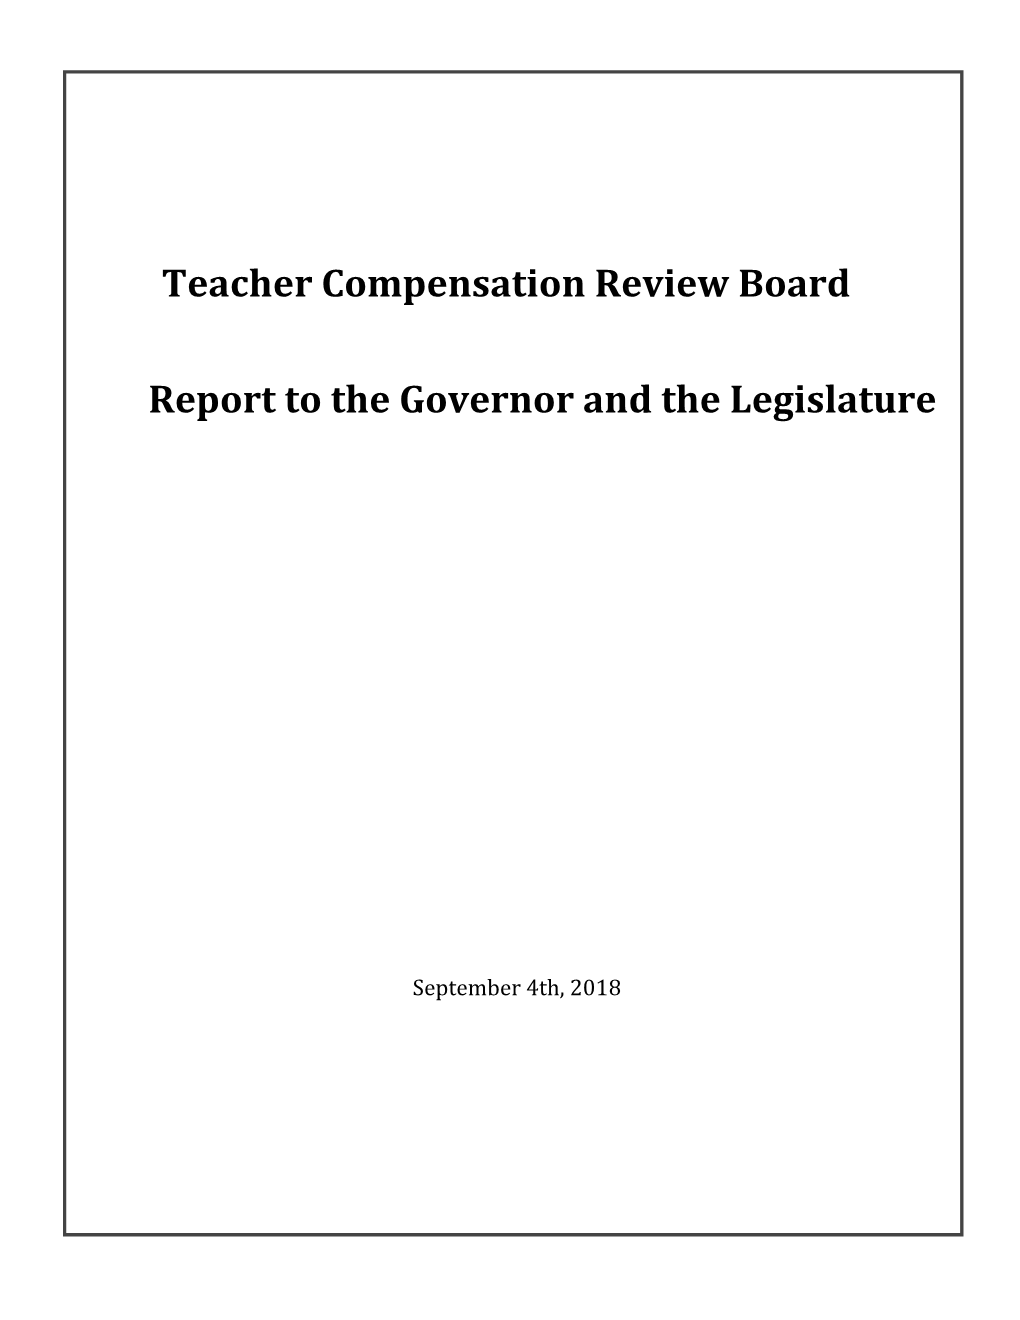 Teacher Compensation Review Board Report to the Governor and The